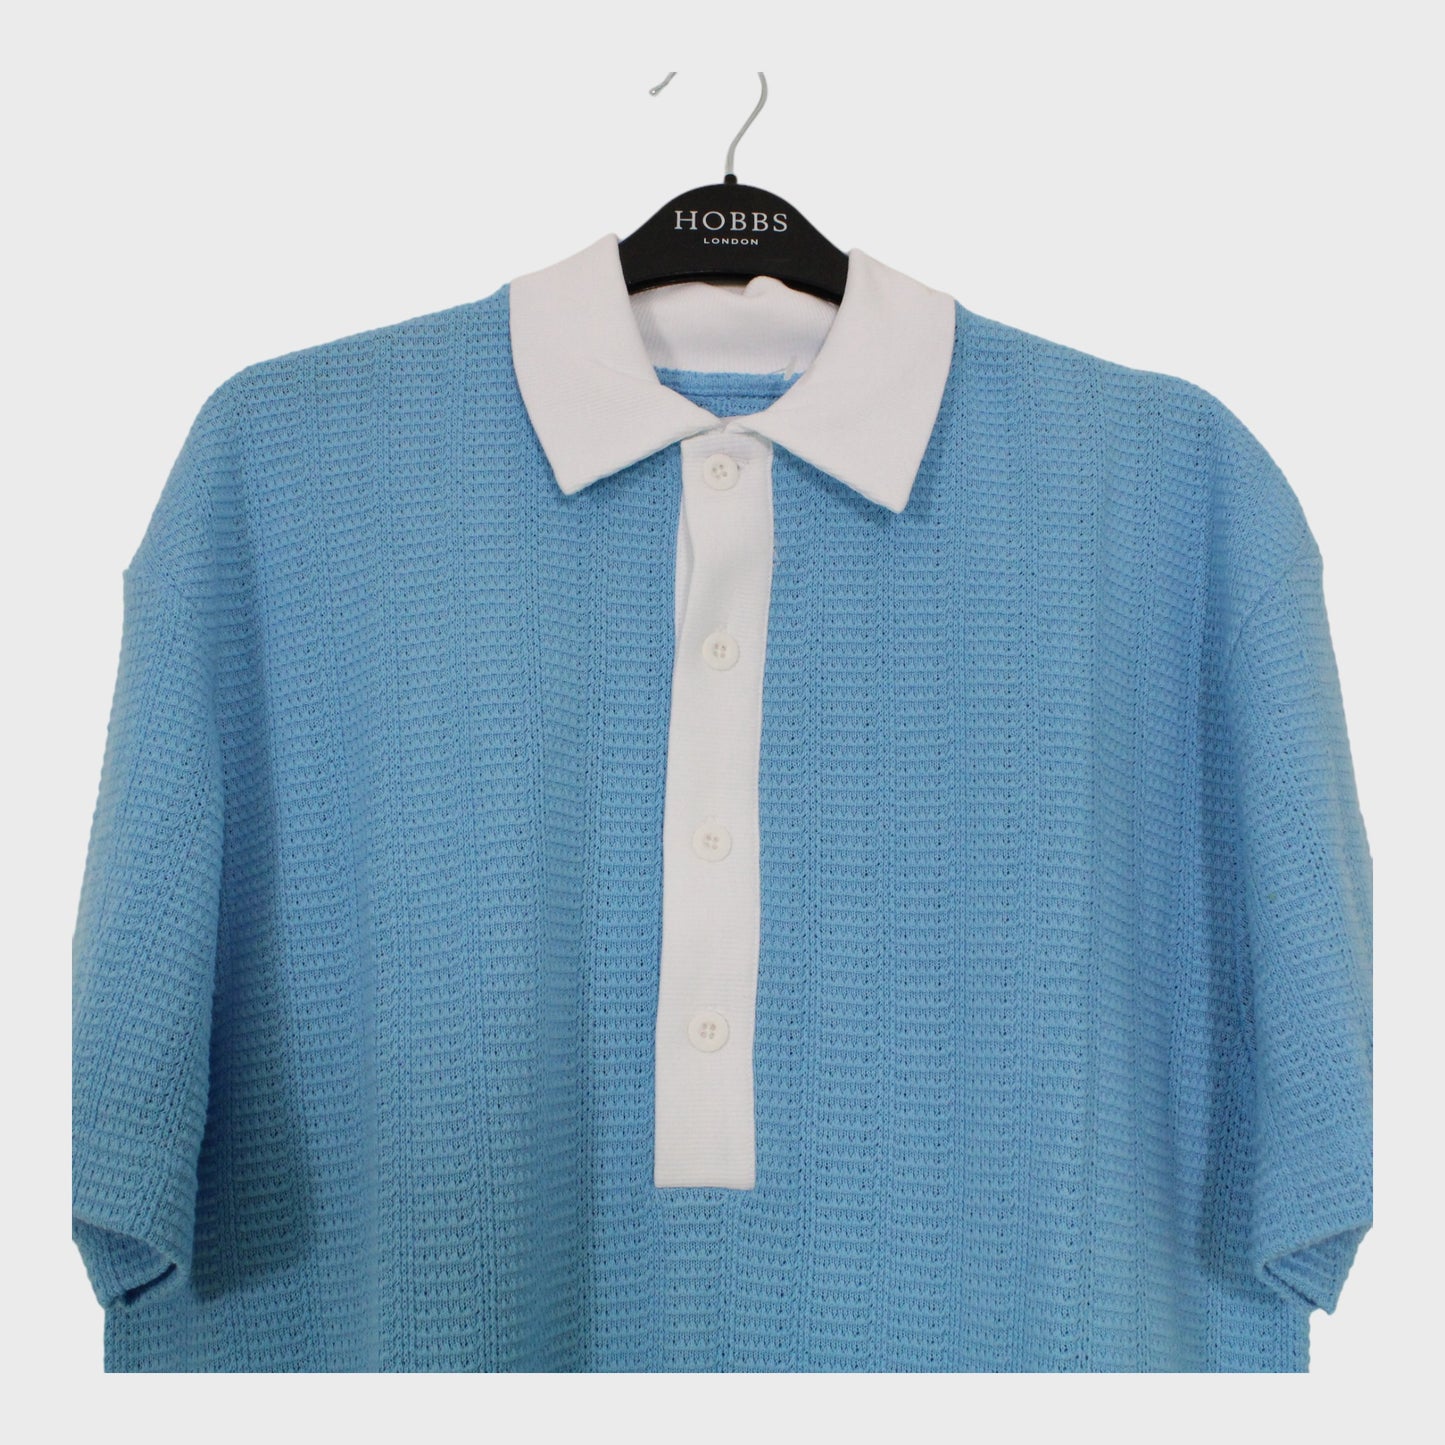 Men's Knit-look Button-up Polo Shirt with Collar Light Blue/White